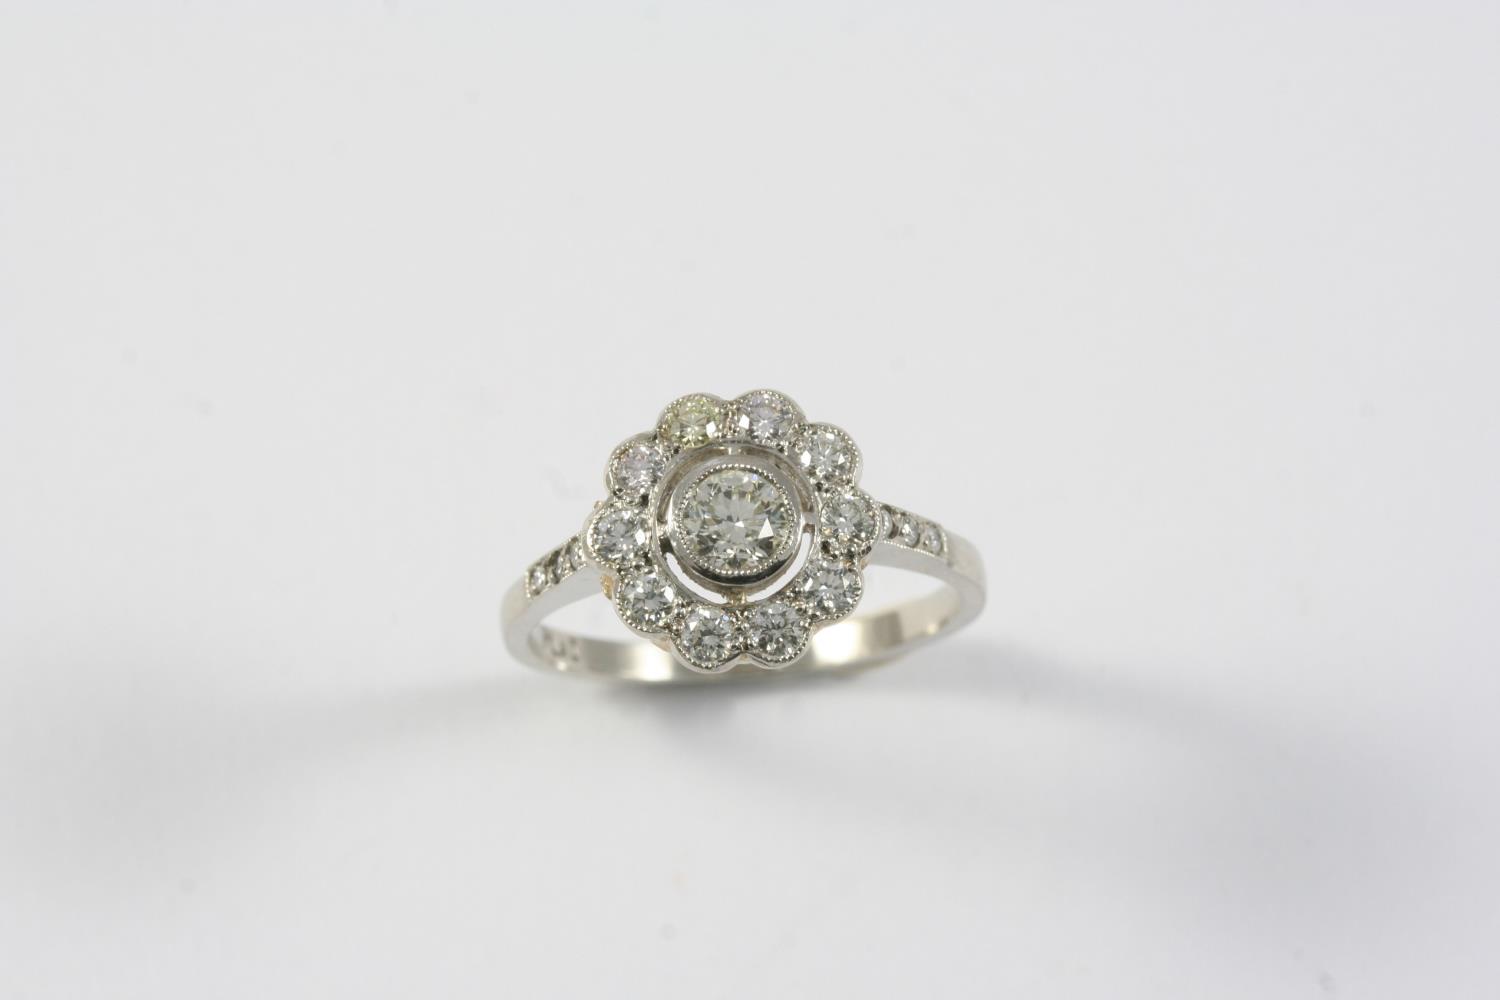 A DIAMOND CLUSTER RING the flowerhead design is set with circular-cut diamonds, in platinum. Size O